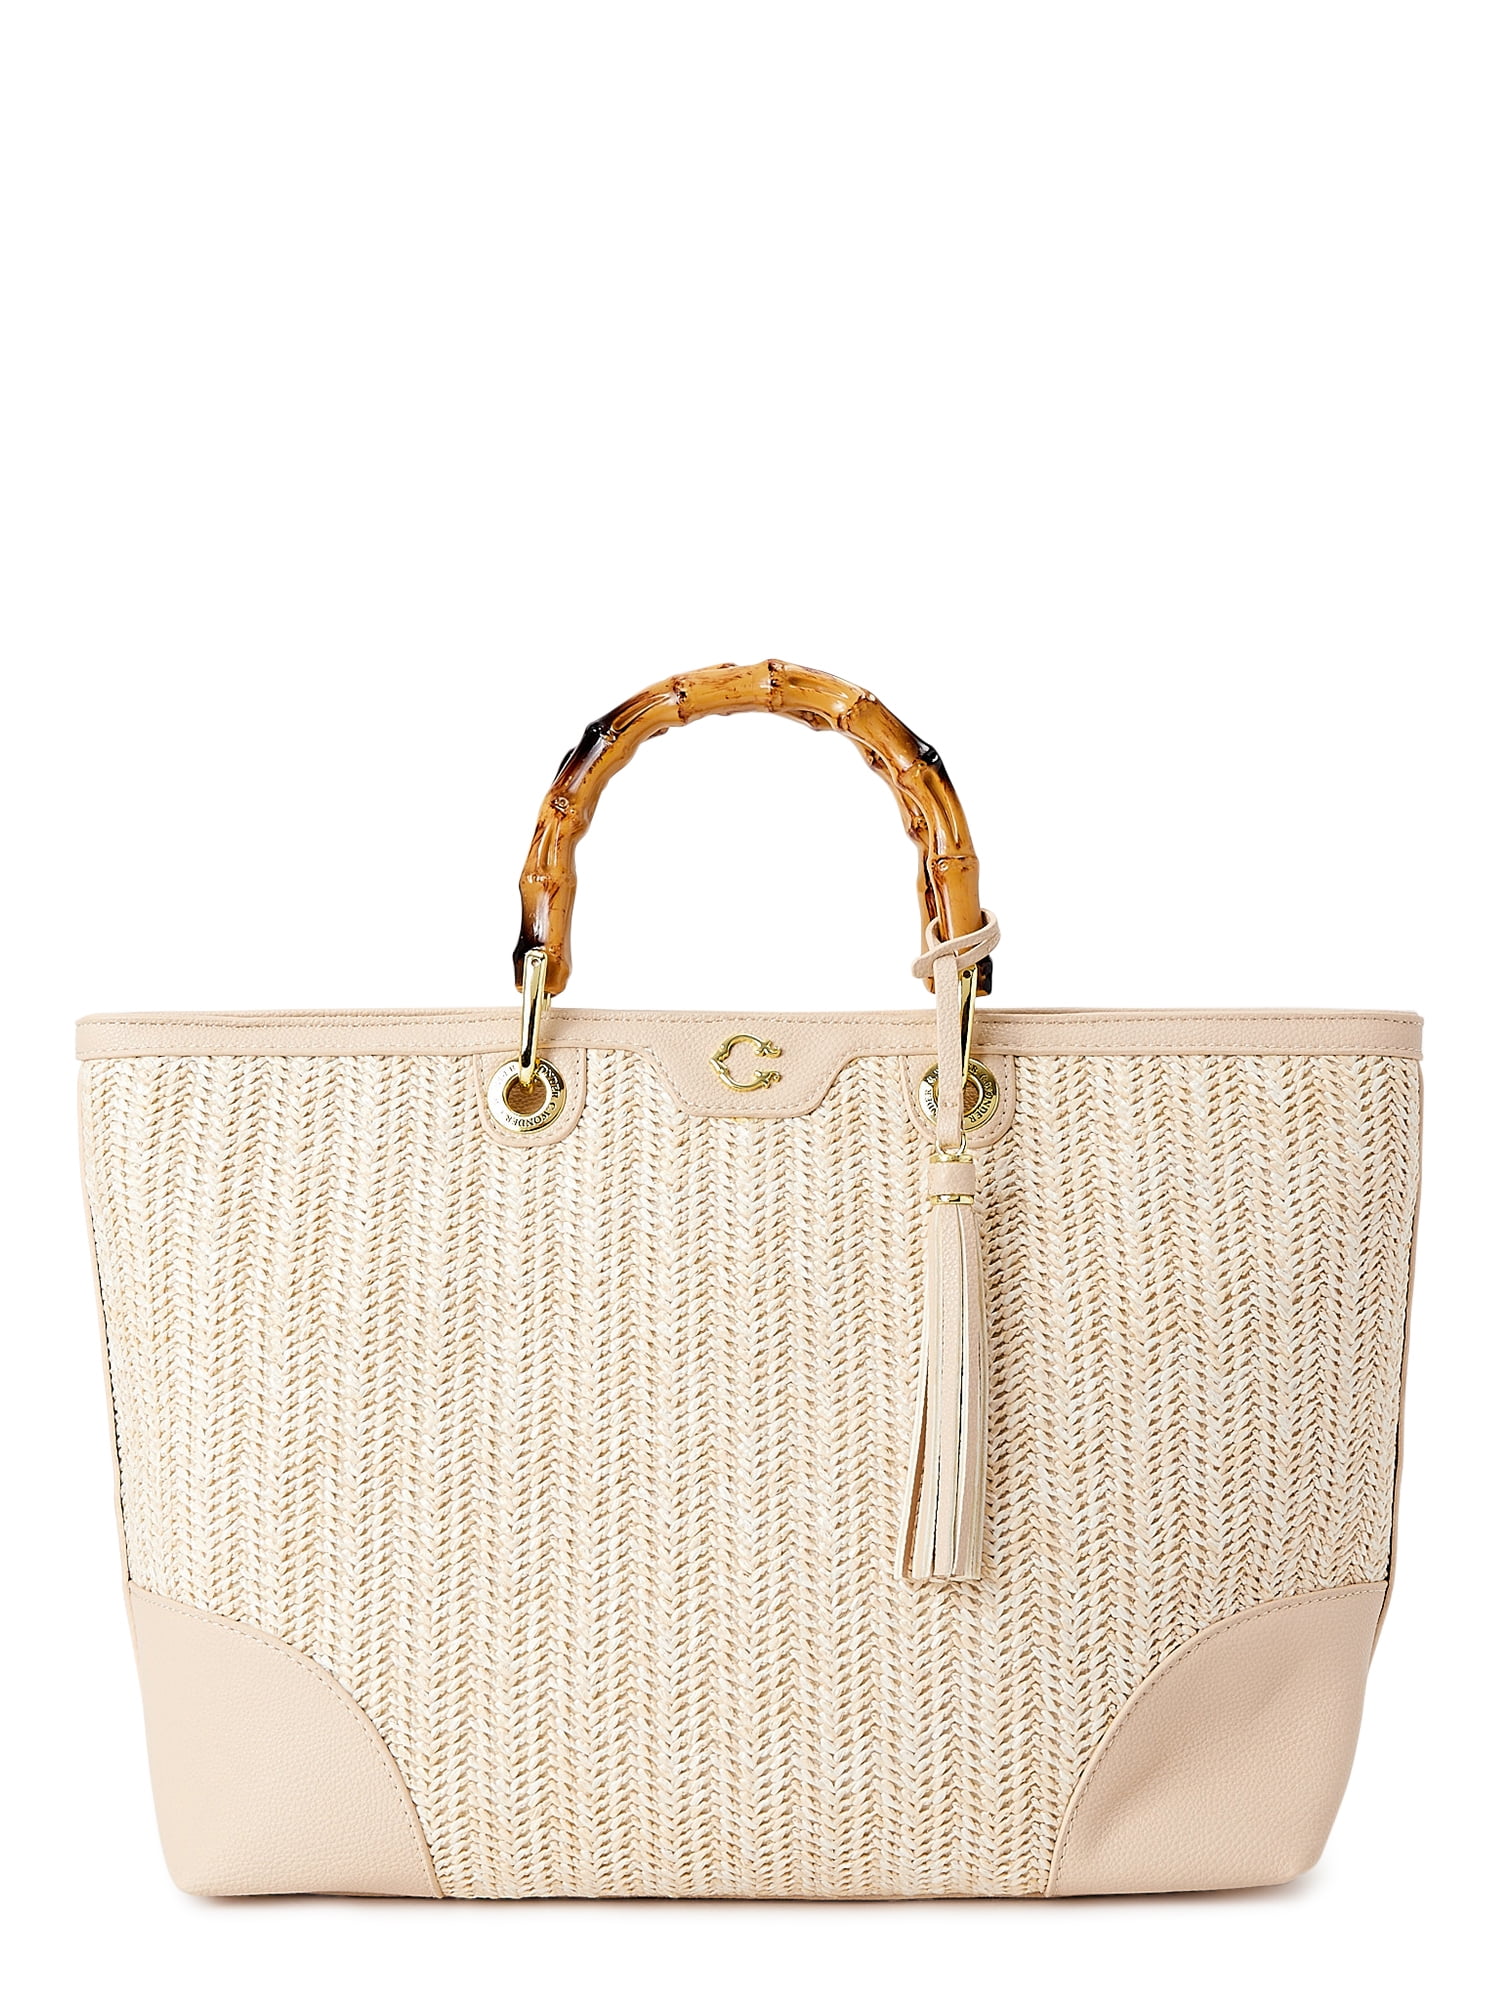 C. Wonder Women's Adult Juno Faux Straw Tote Bag with Bamboo-Look Handles  Wheat 